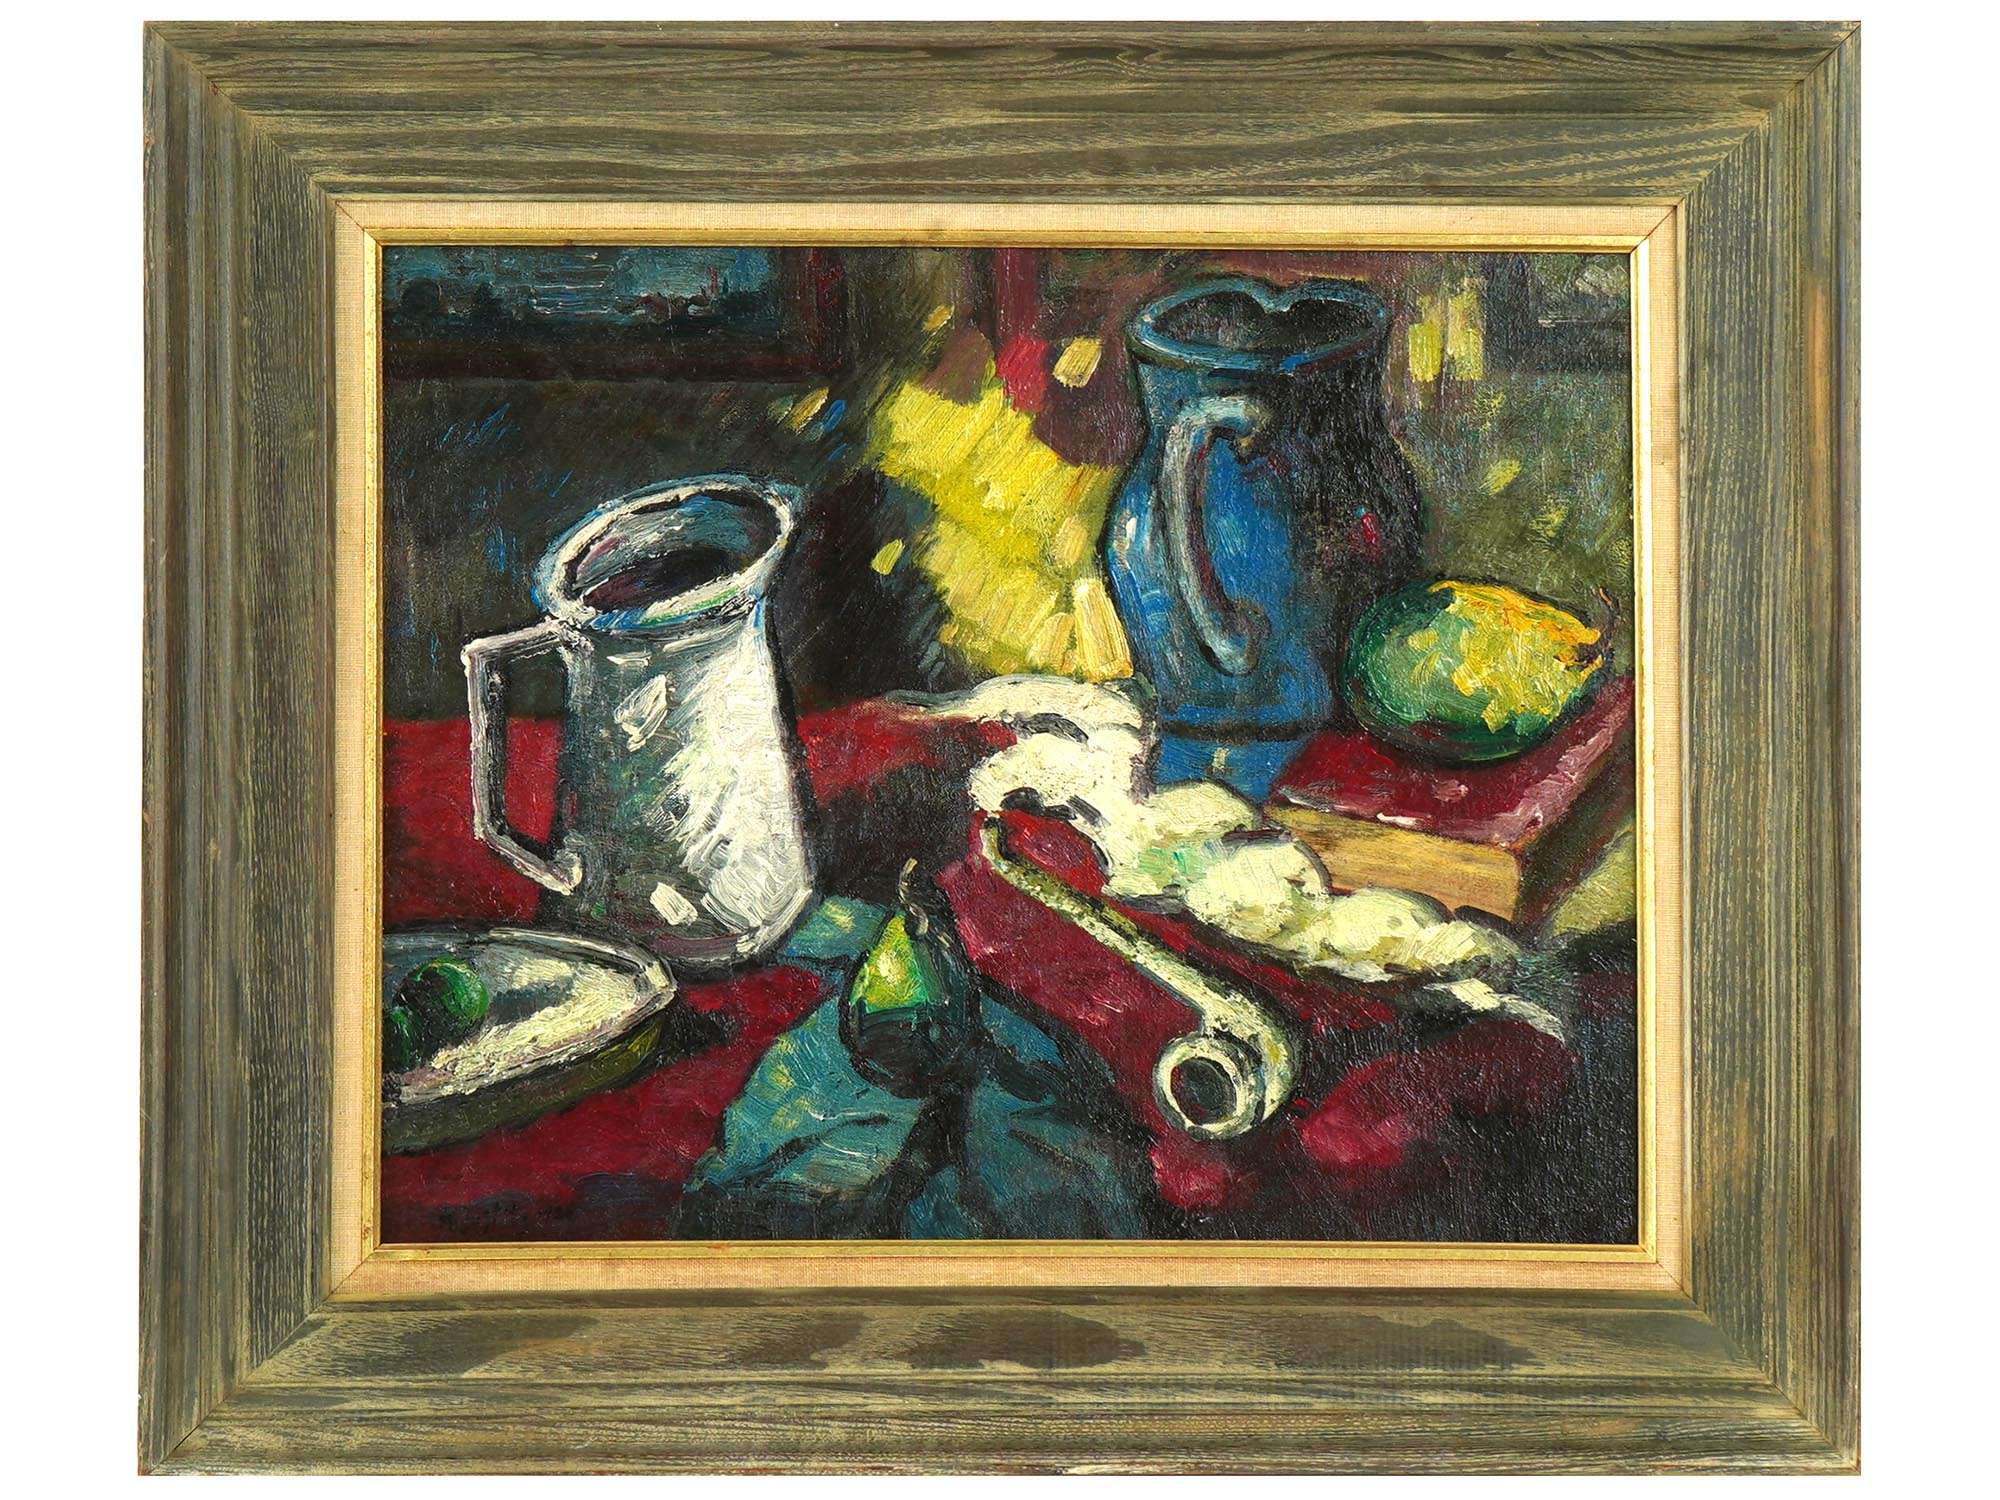 CZECH STILL LIFE OIL PAINTING BY ALFRED JUSTITZ PIC-0